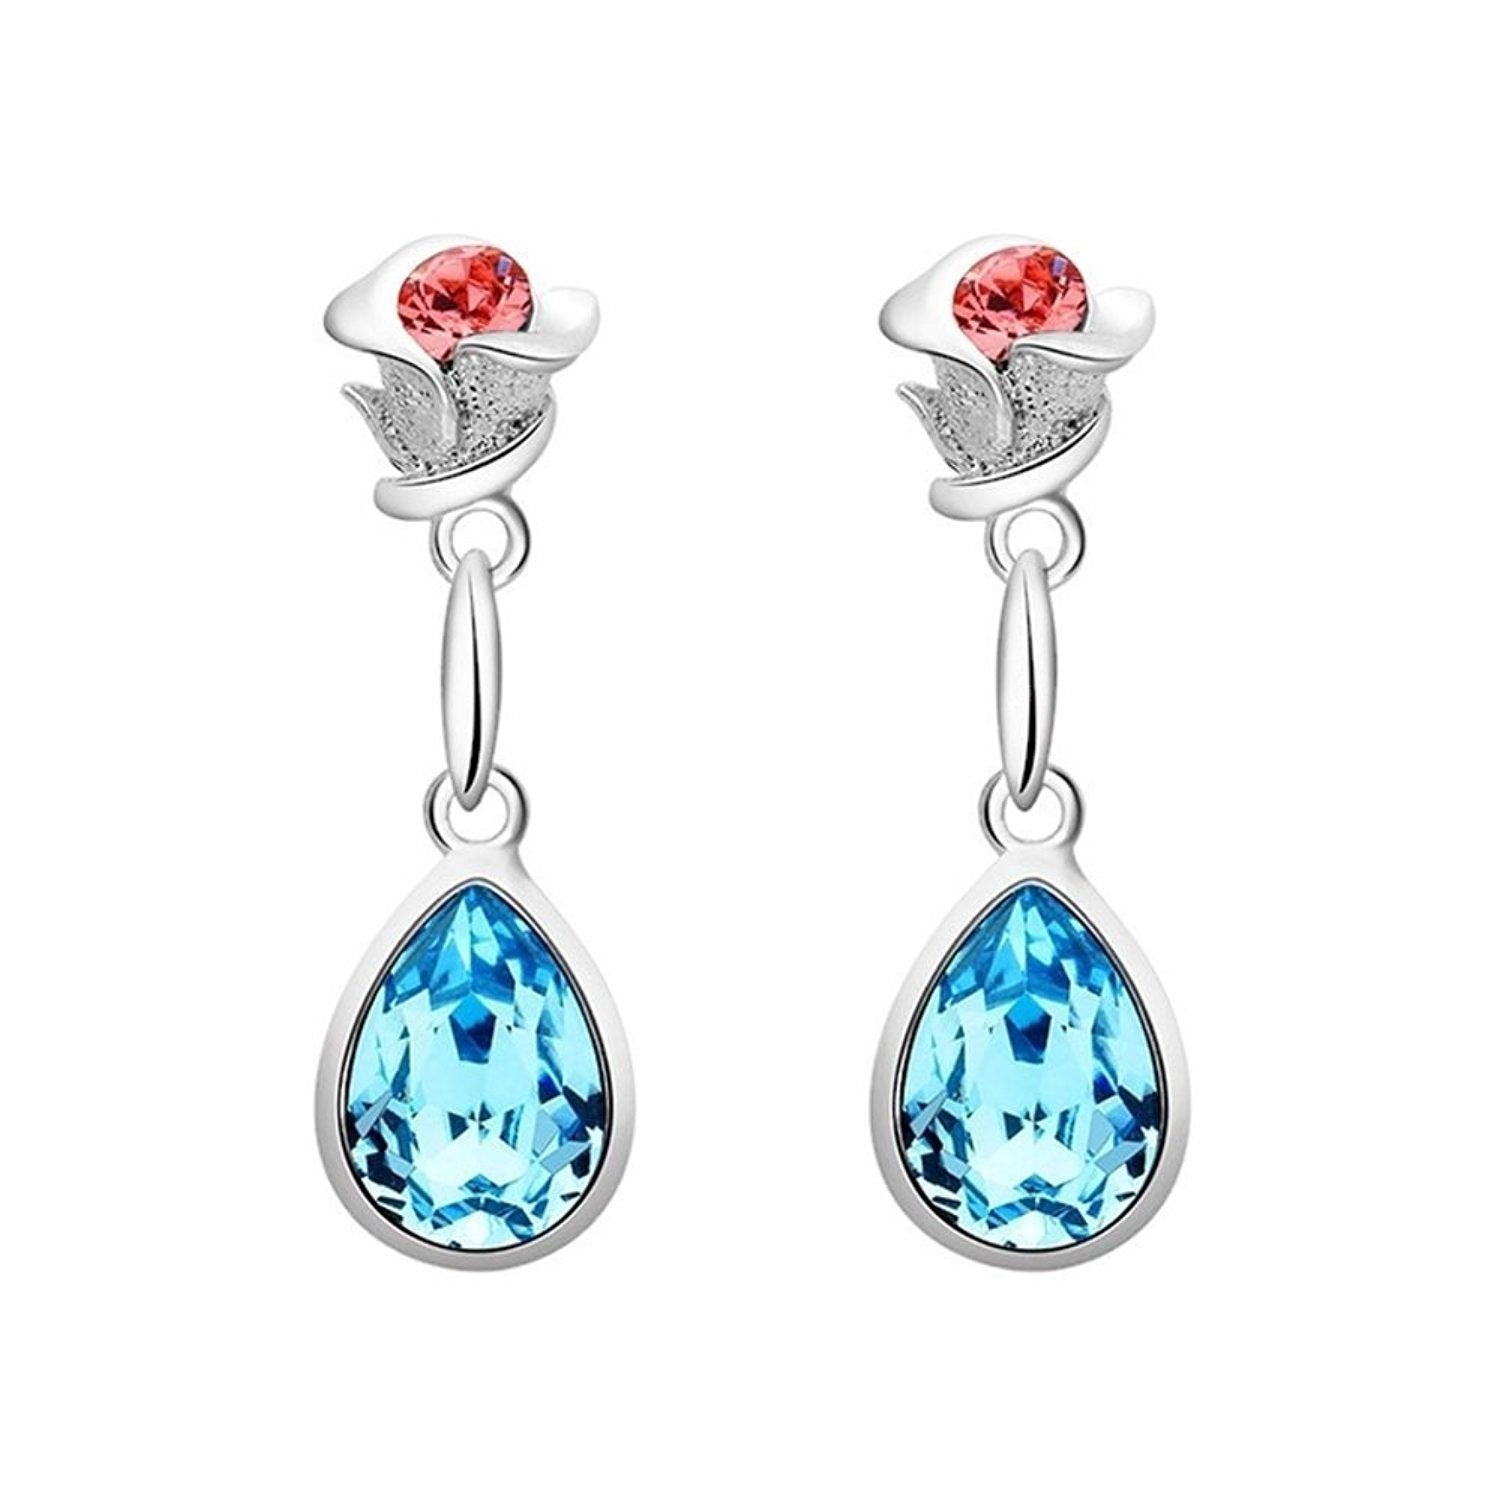 Yellow Chimes Crystals from Swarovski Silver Blue Flower Crystal Designer Studs Earrings for Women and Girls